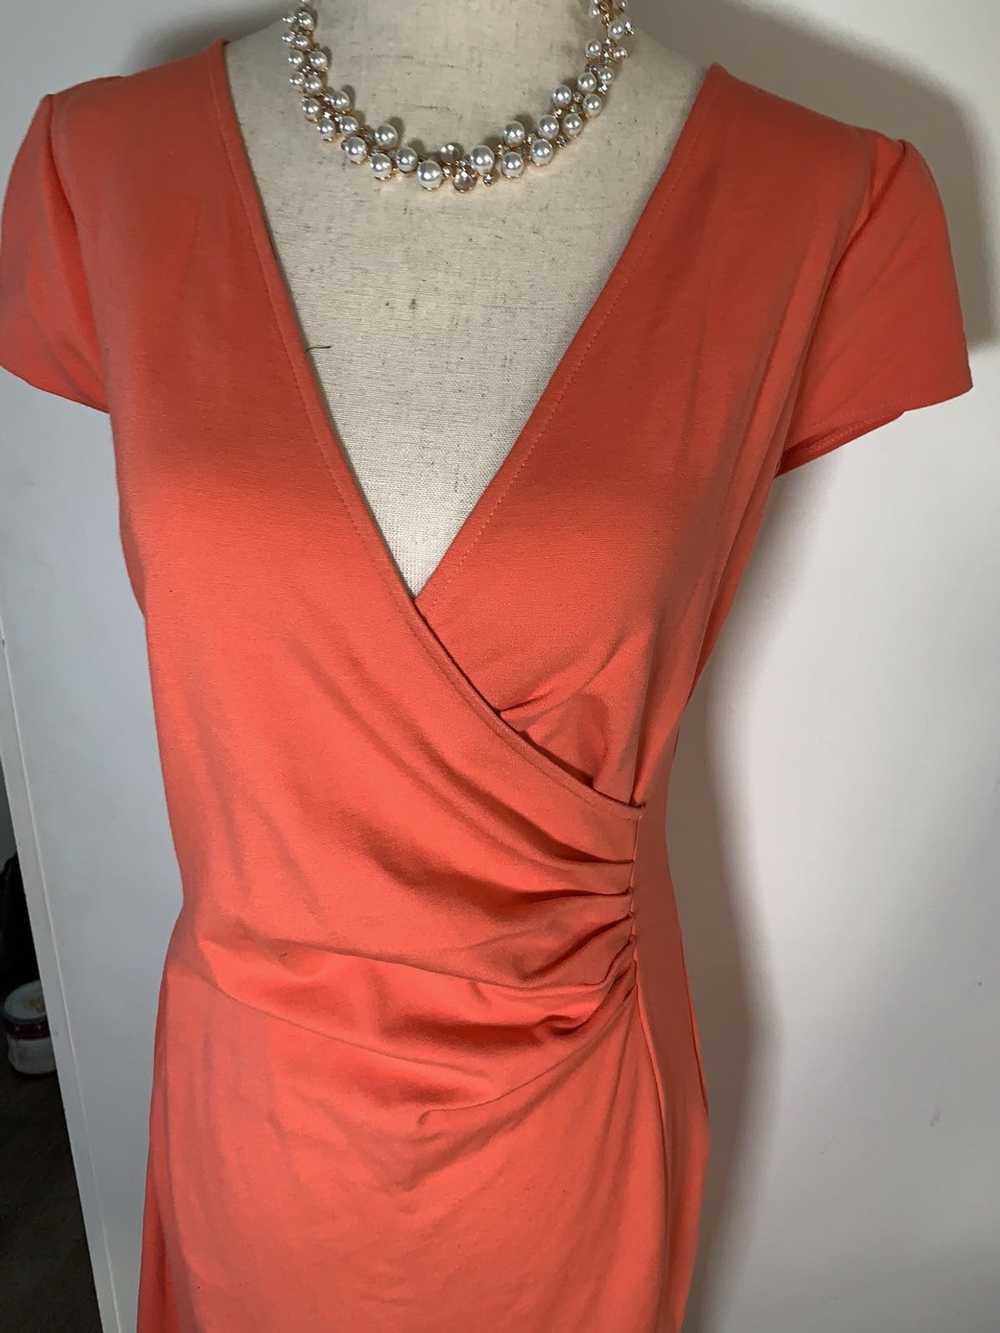 Kenneth Cole Kenneth Cole dress size 6 - image 2